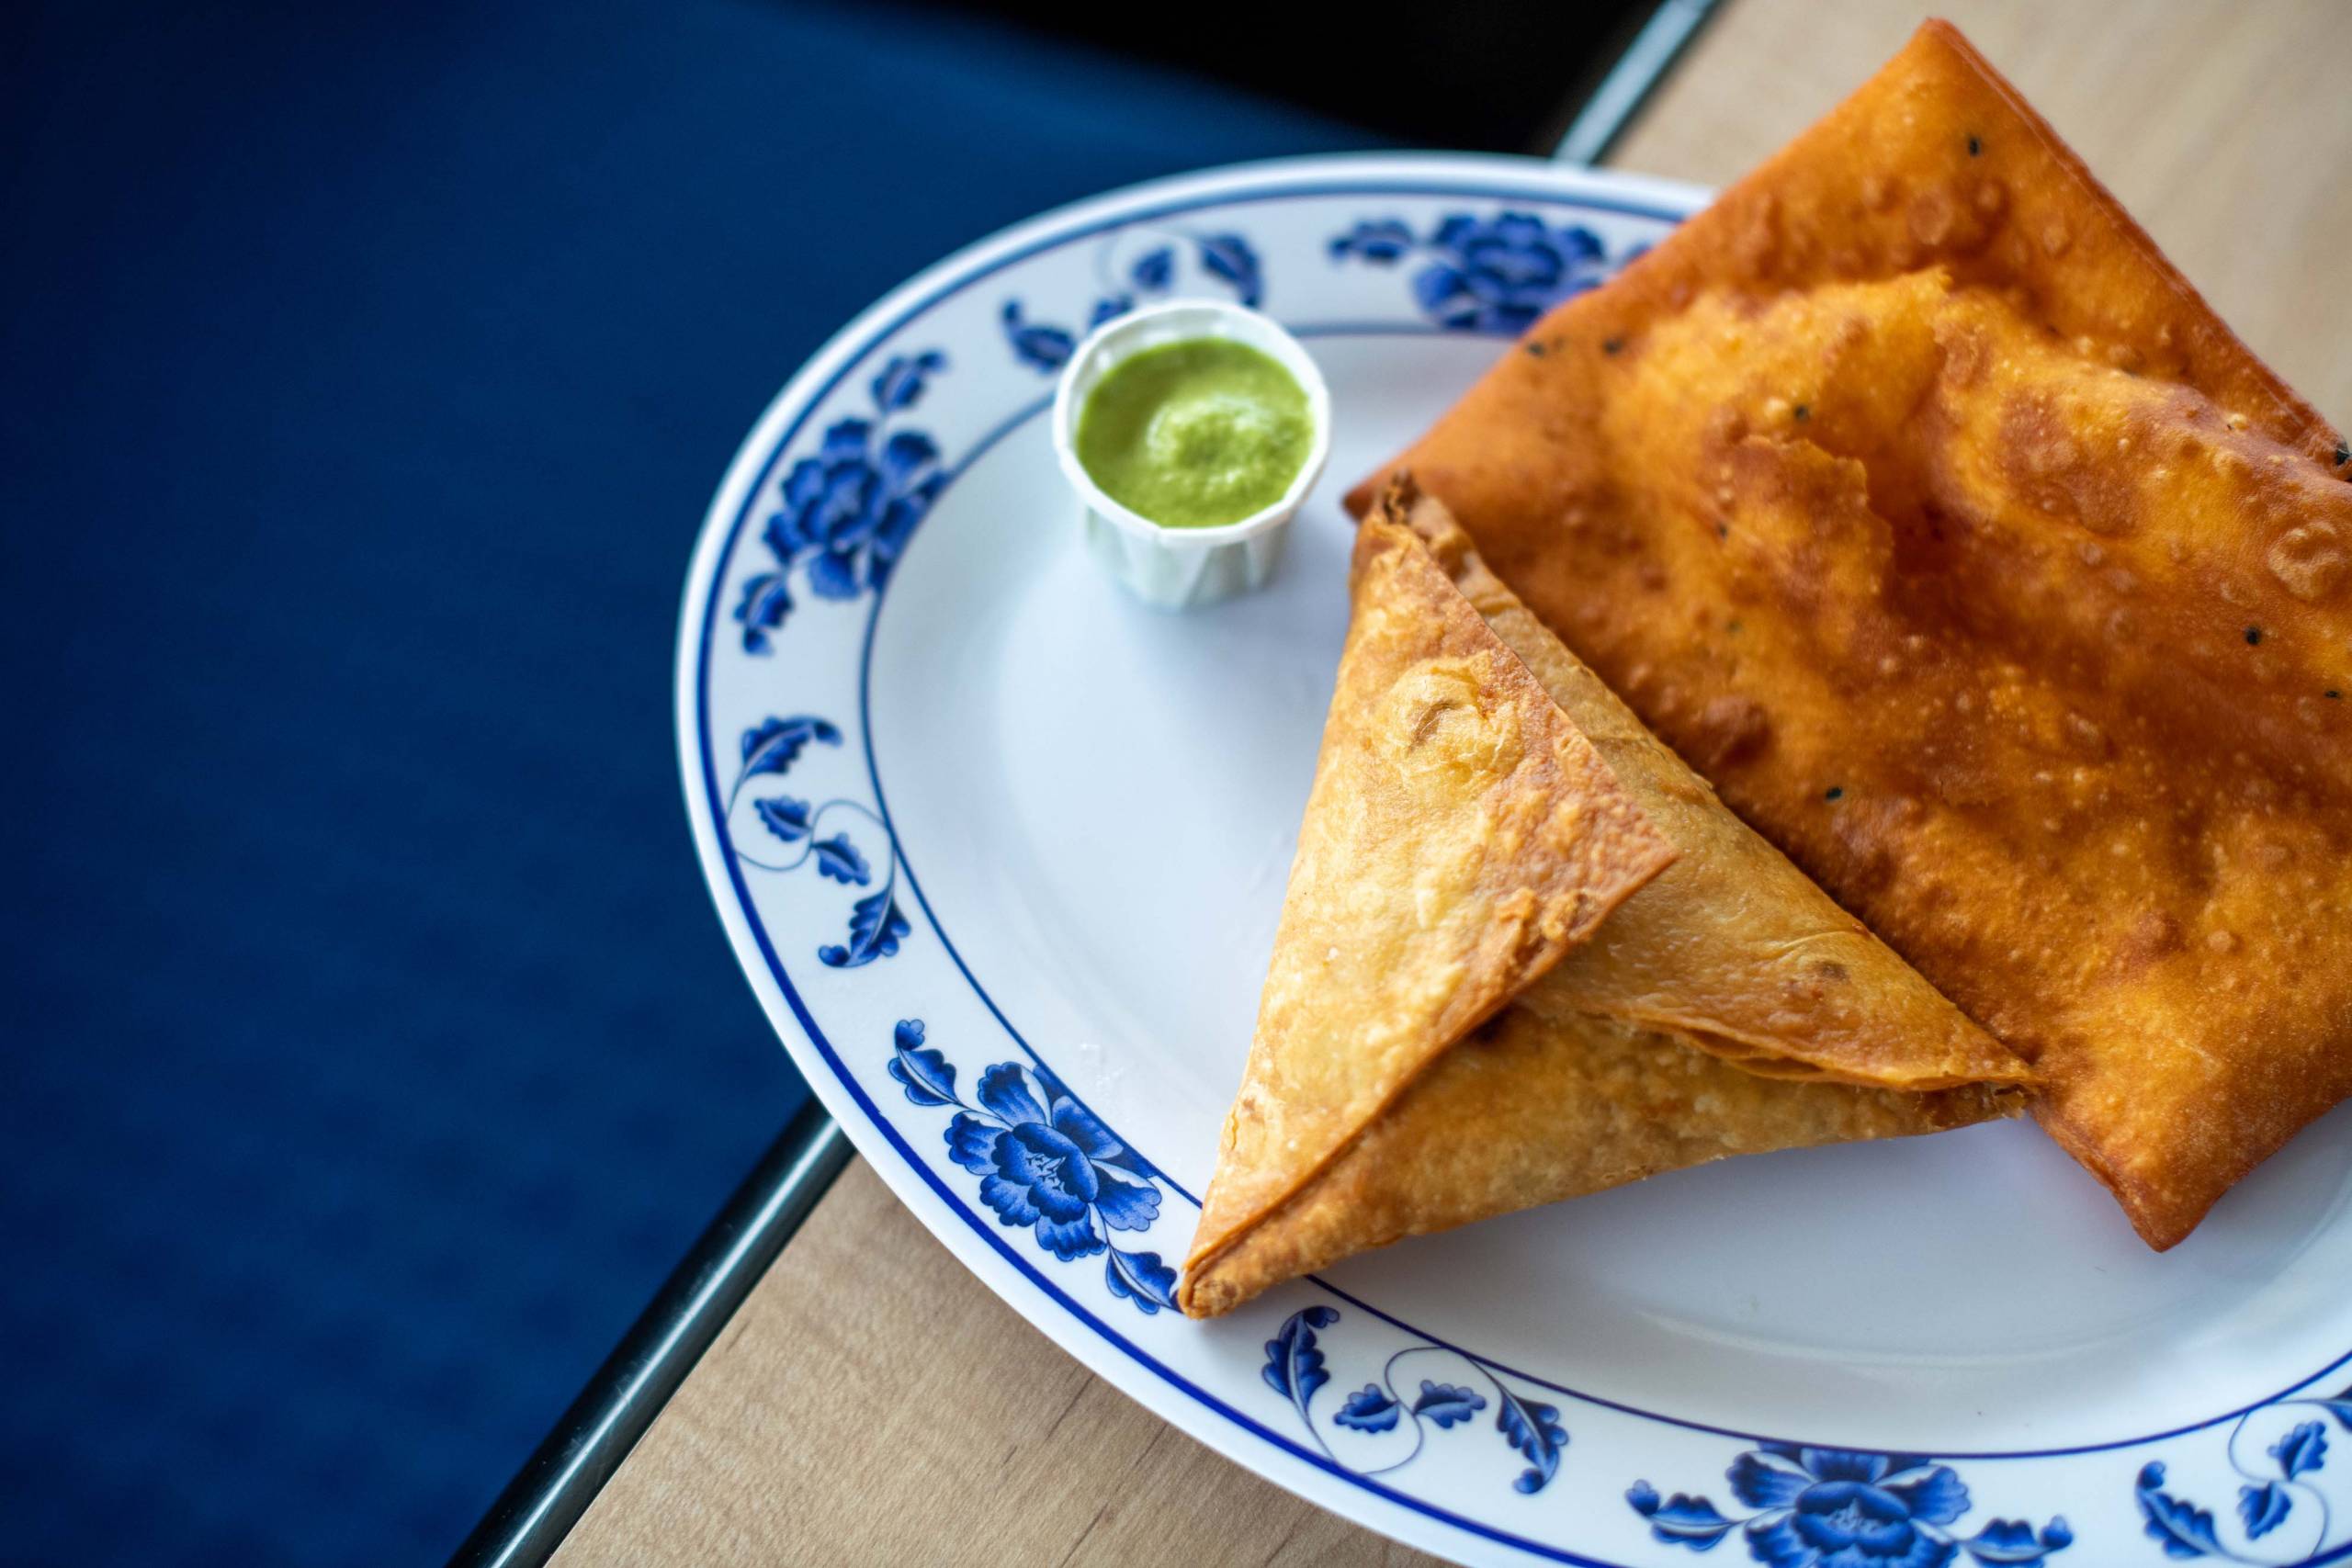 A samosa on a plate with a small container of green hot sauce.